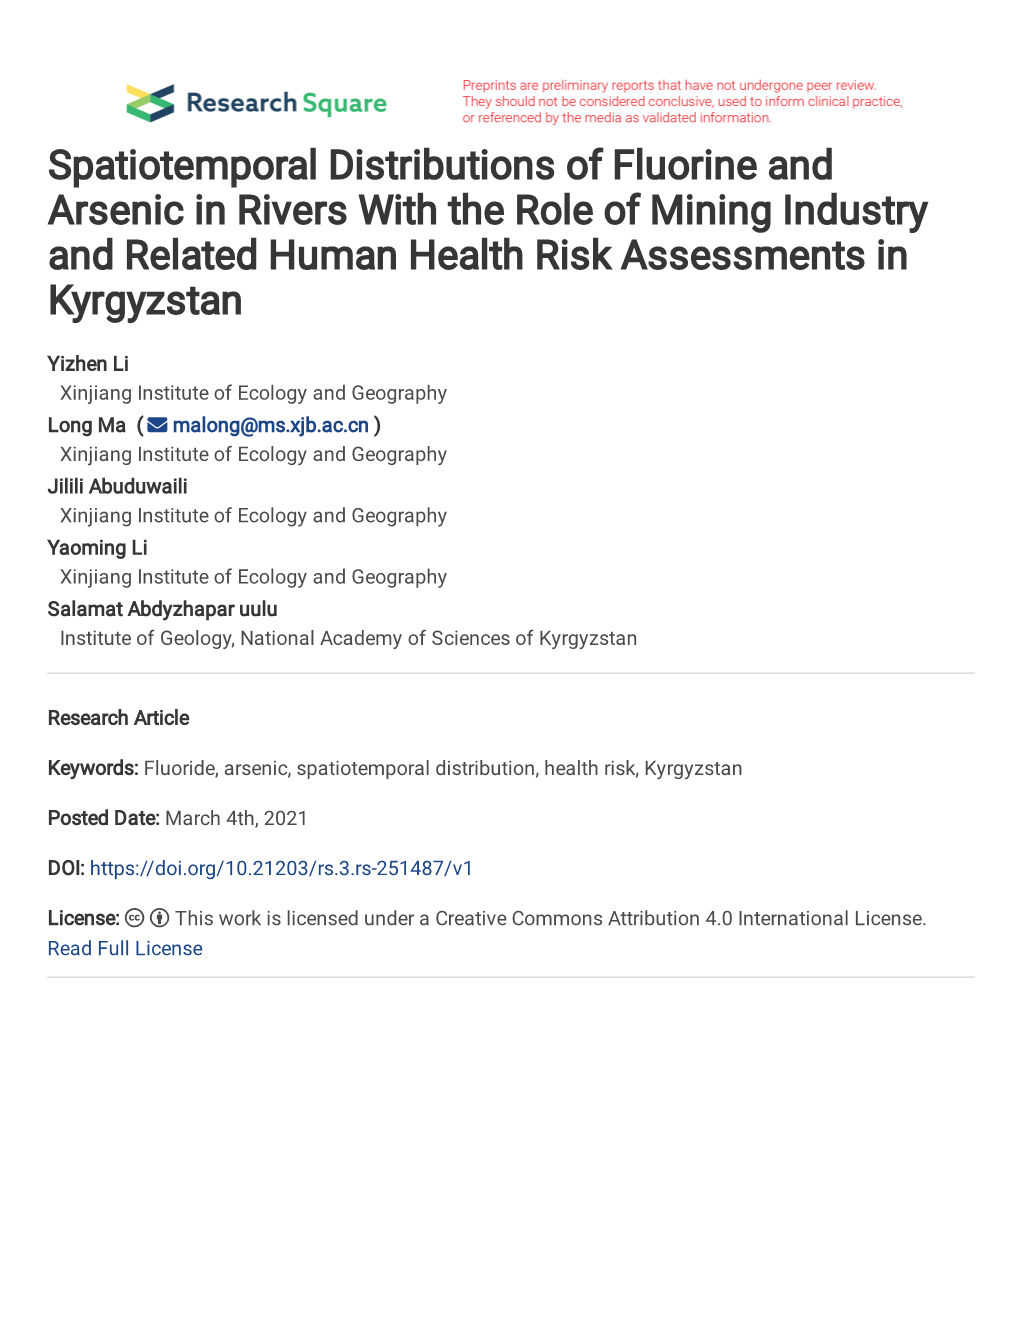 Spatiotemporal Distributions of Fluorine and Arsenic in Rivers with the Role of 1 Mining Industry and Related Human Health Risk